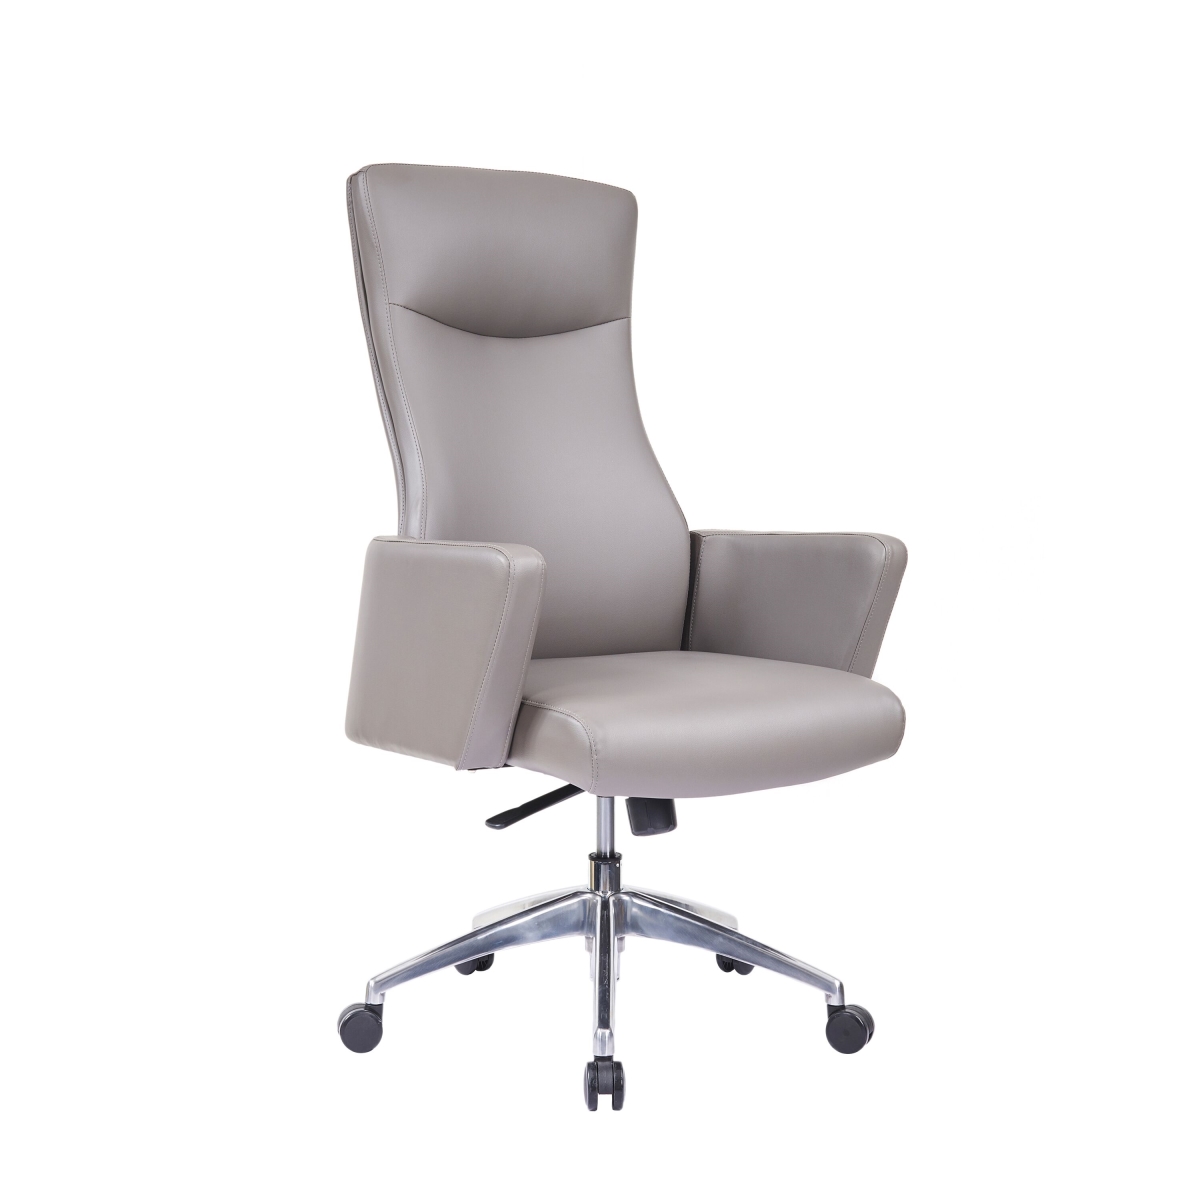 Rta-1011-tpe High Back Executive Chair, Taupe - 34 X 25 X 16 In.